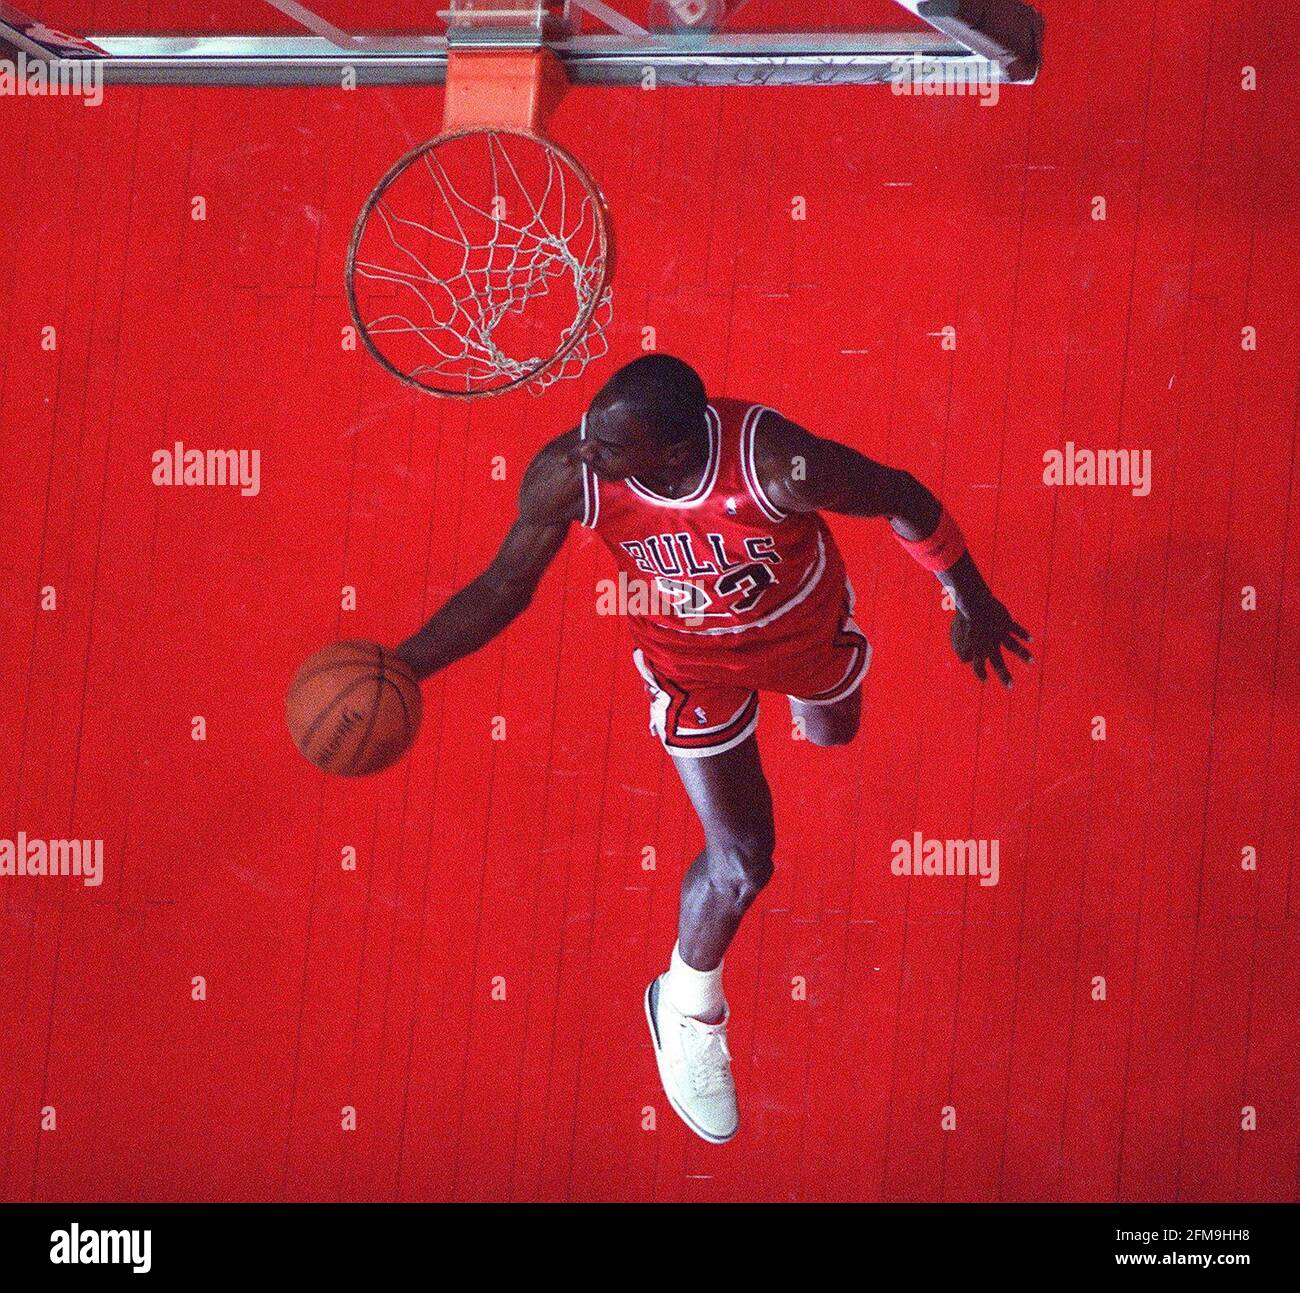 USA. 05th May, 2021. Michael Jordan flies to the hoop during the NBA Slam Dunk Contest Feb. 6, 1988, in Chicago. Jordan went to the wire against Dominique Wilkins to win the contest. (Photo by Bob Langer/Chicago Tribune/TNS/Sipa USA) Credit: Sipa USA/Alamy Live News Stock Photo